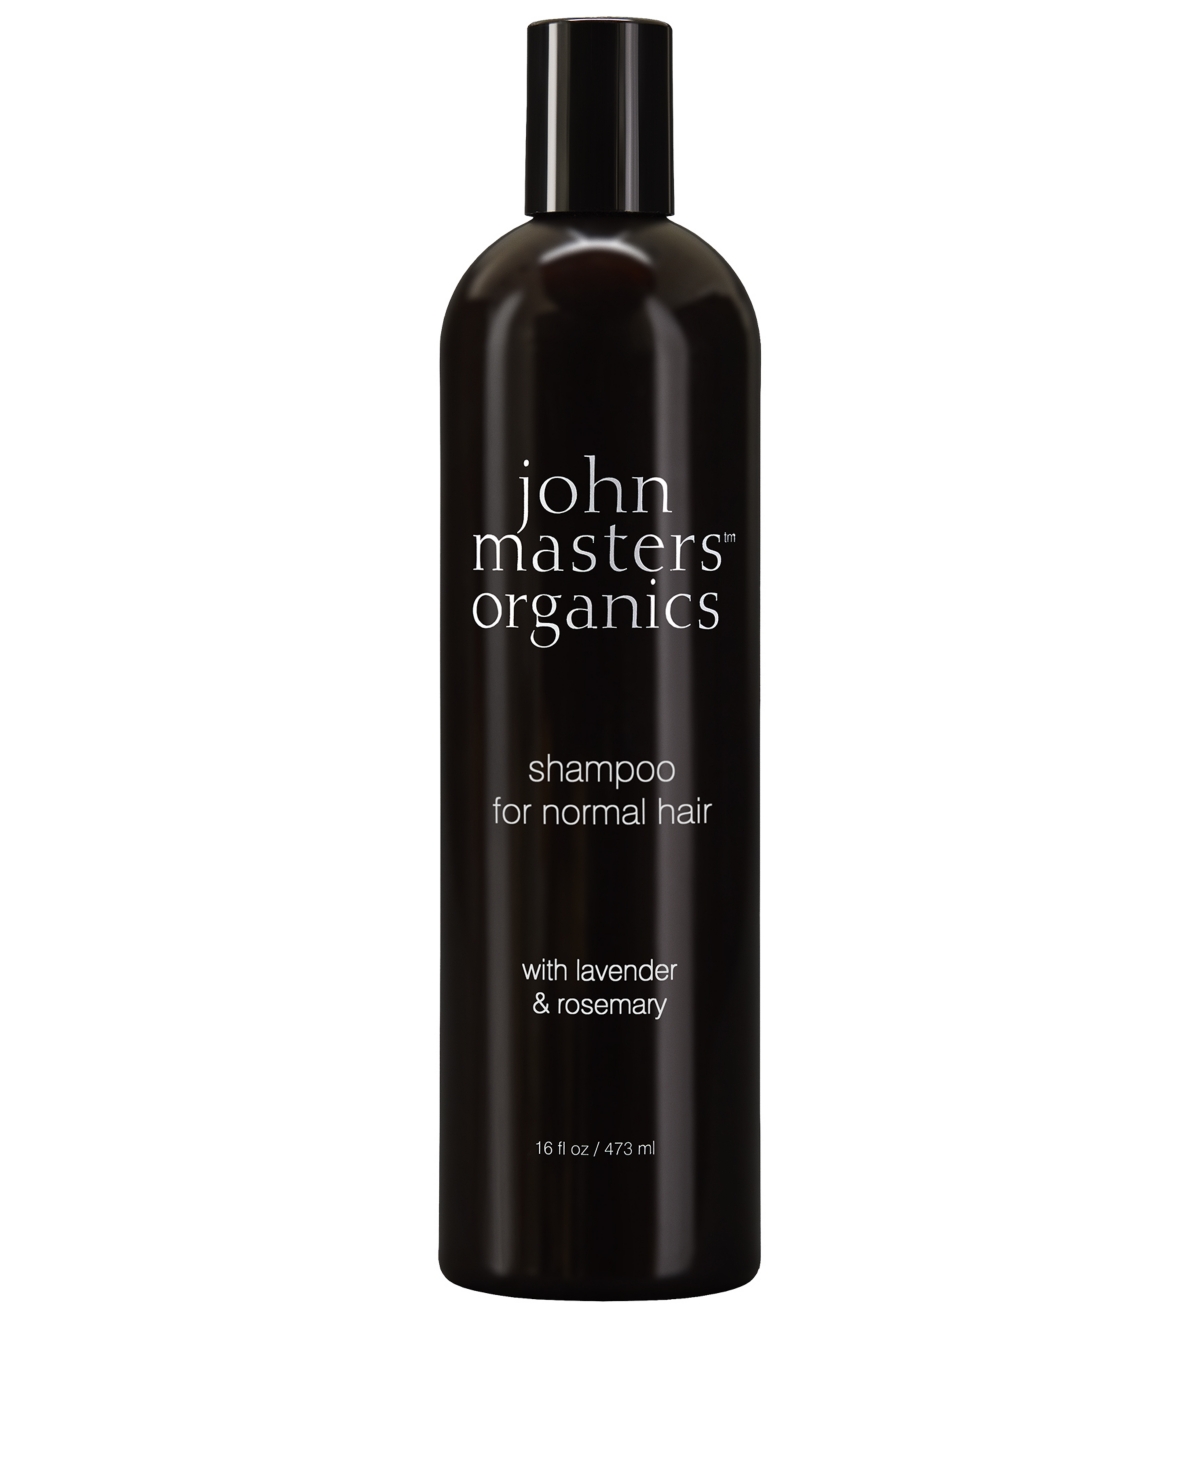 Shampoo For Normal Hair With Lavender & Rosemary, 16 oz.